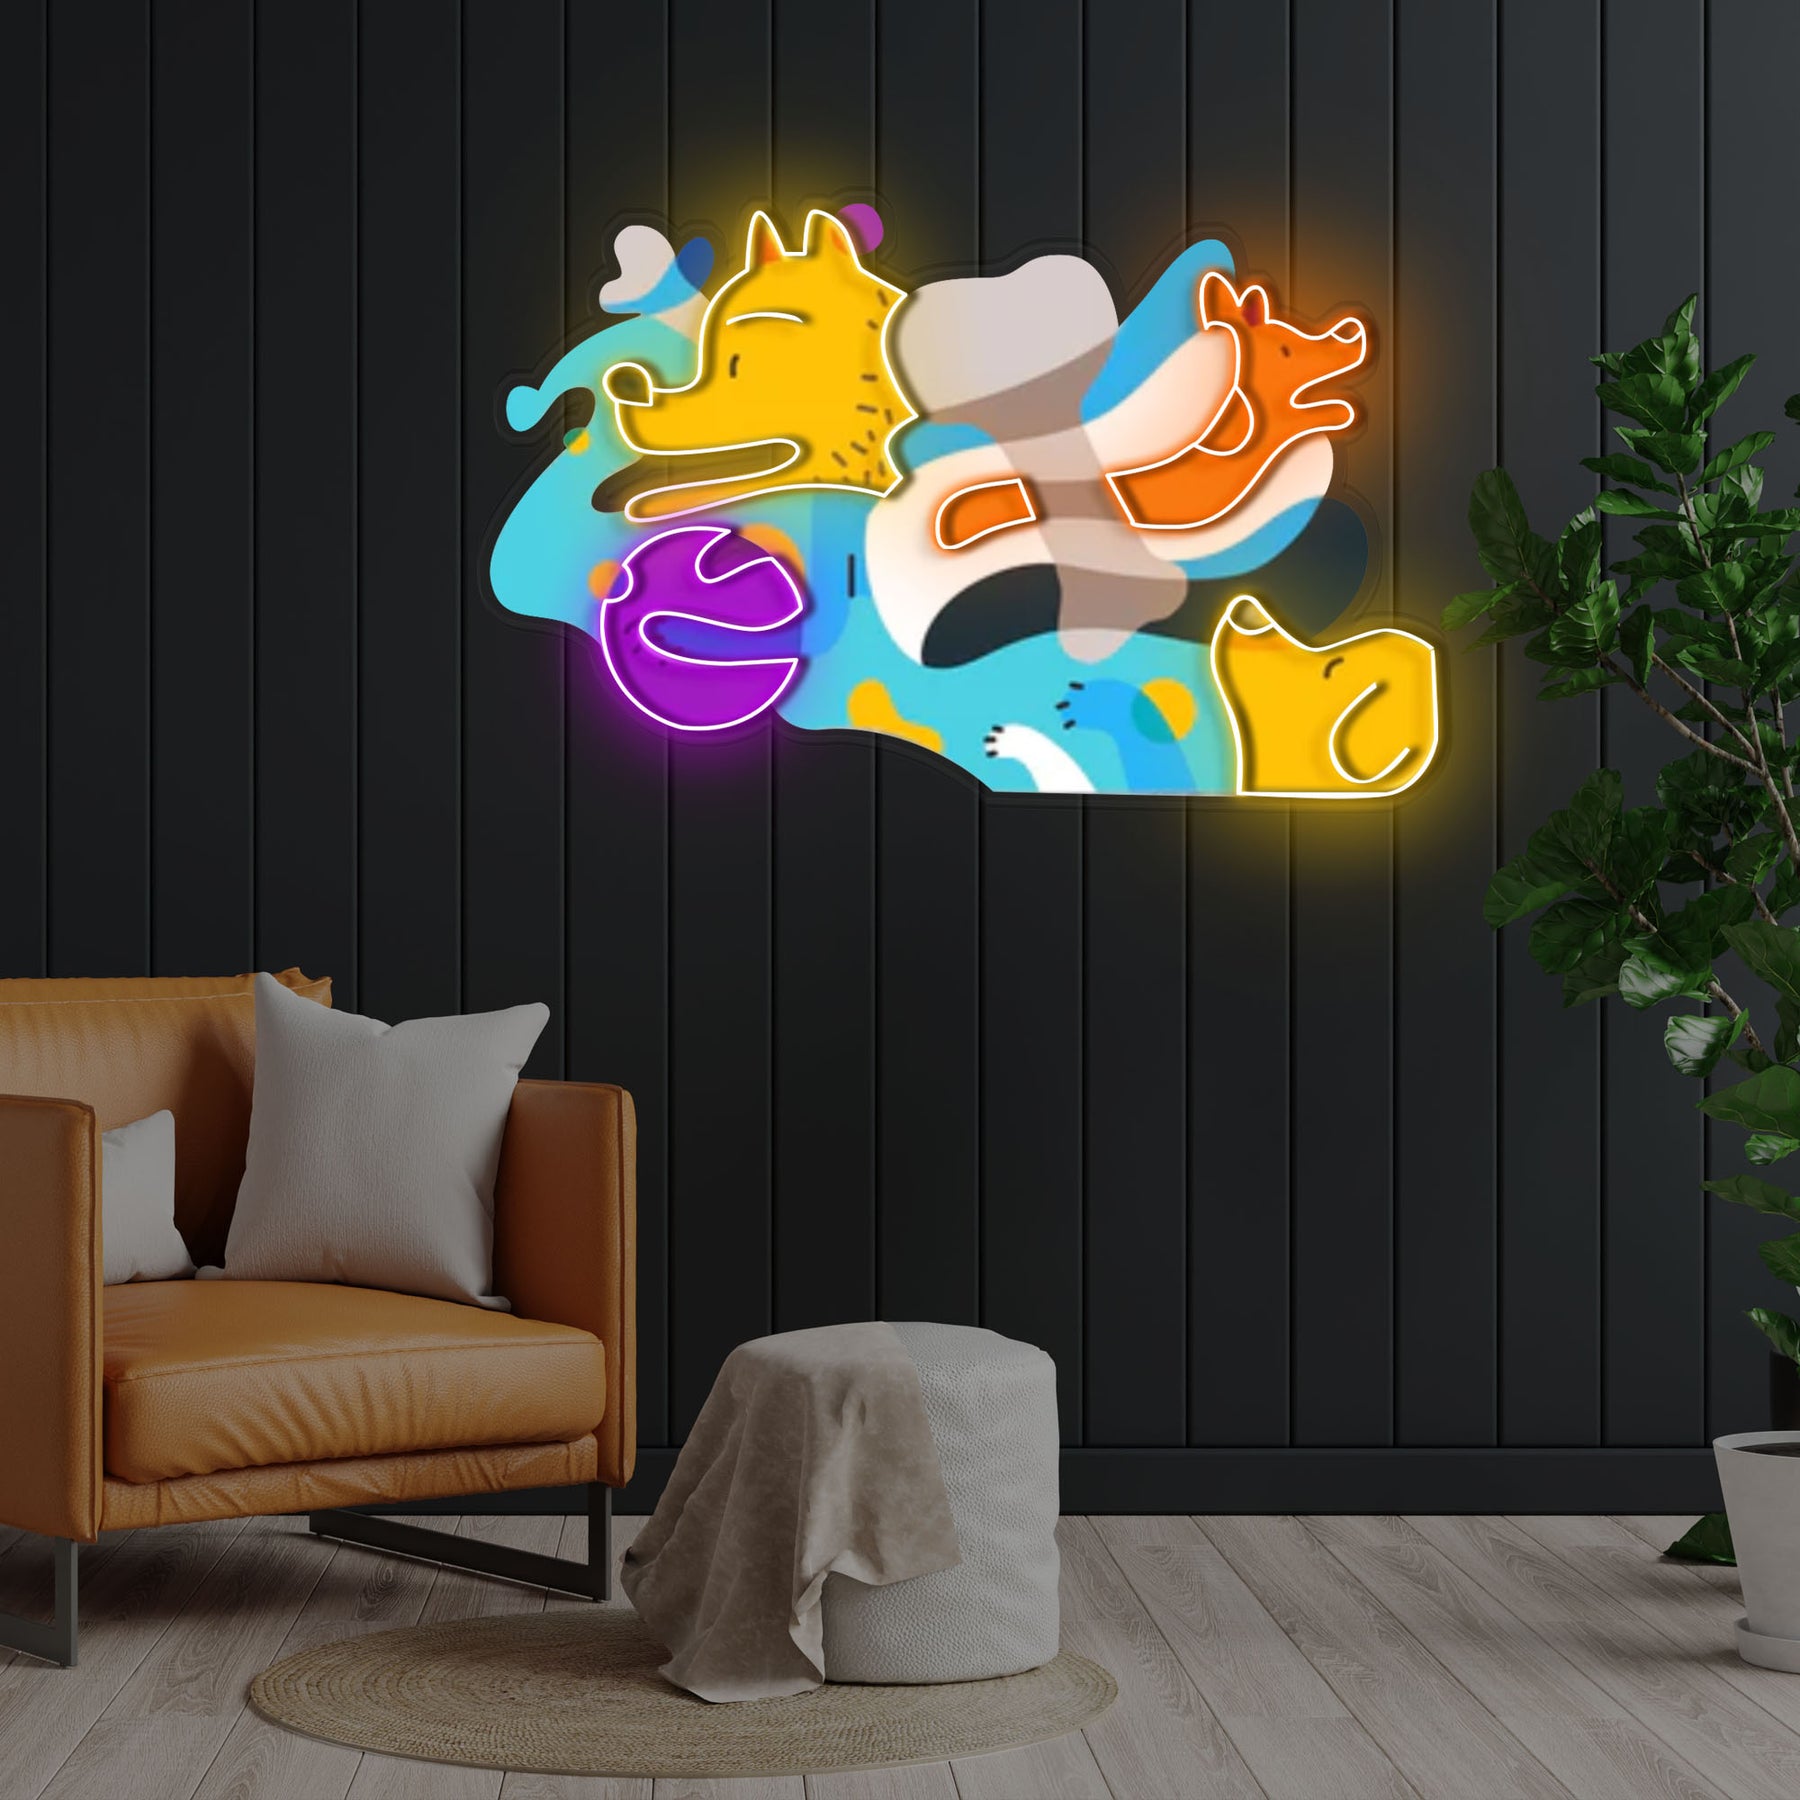 Get inspiration from Picasso Puppies Neon x Acrylic Artwork